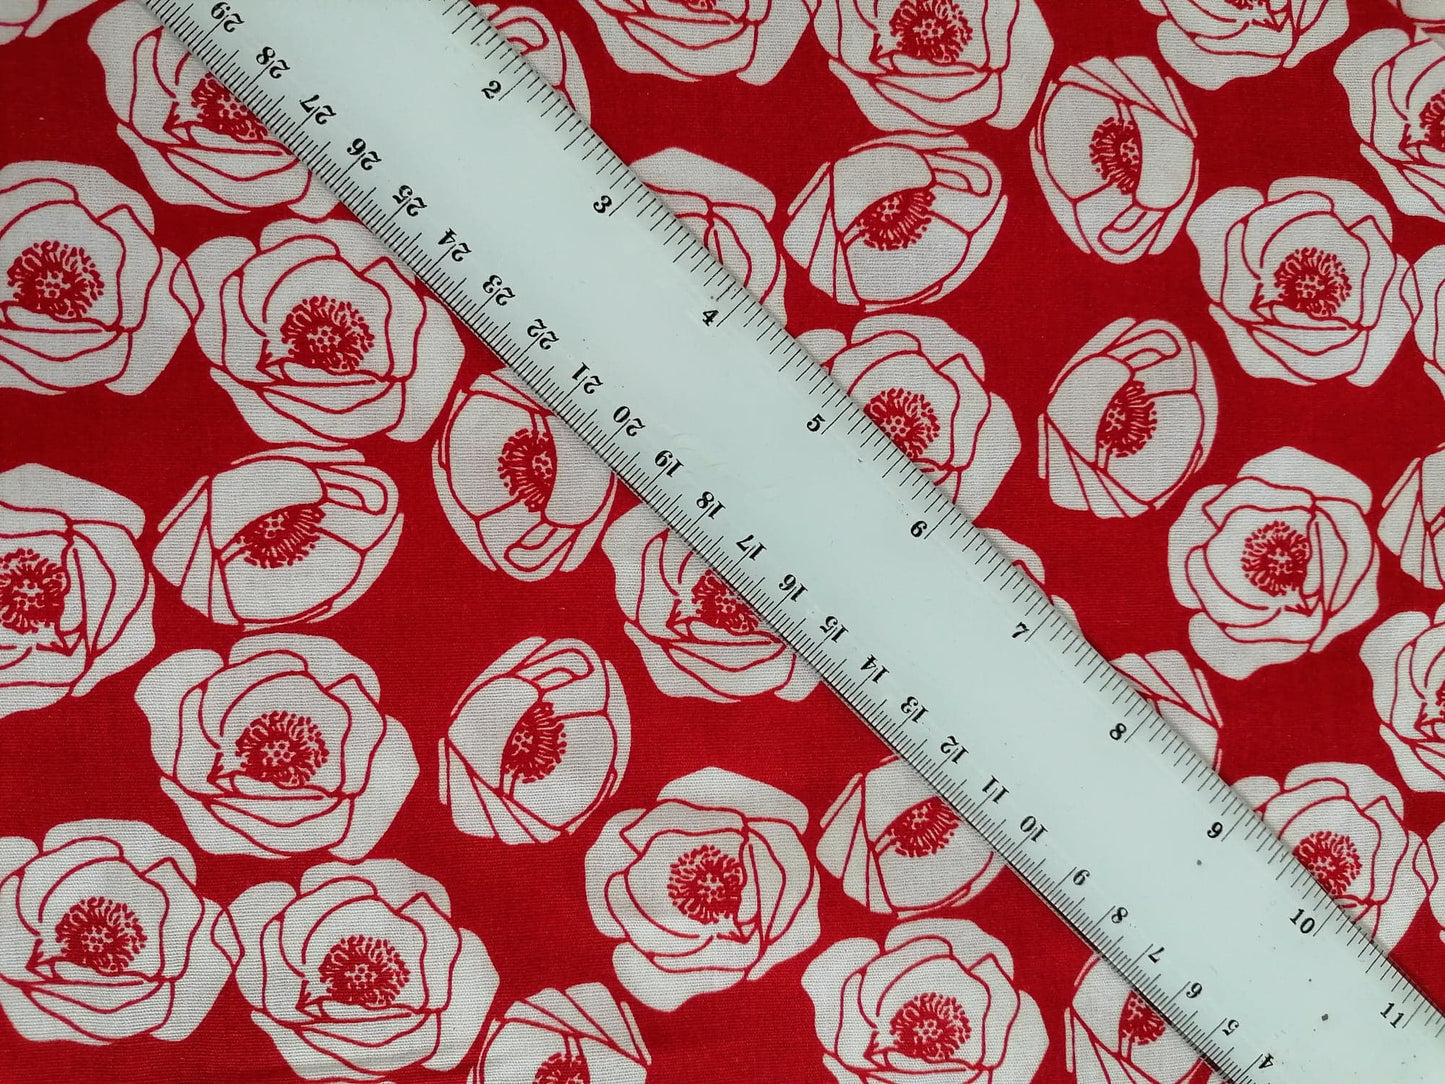 100% Cotton - Crafting & Quilting - Floral - Red/White - 44" Wide - Sold By the Metre